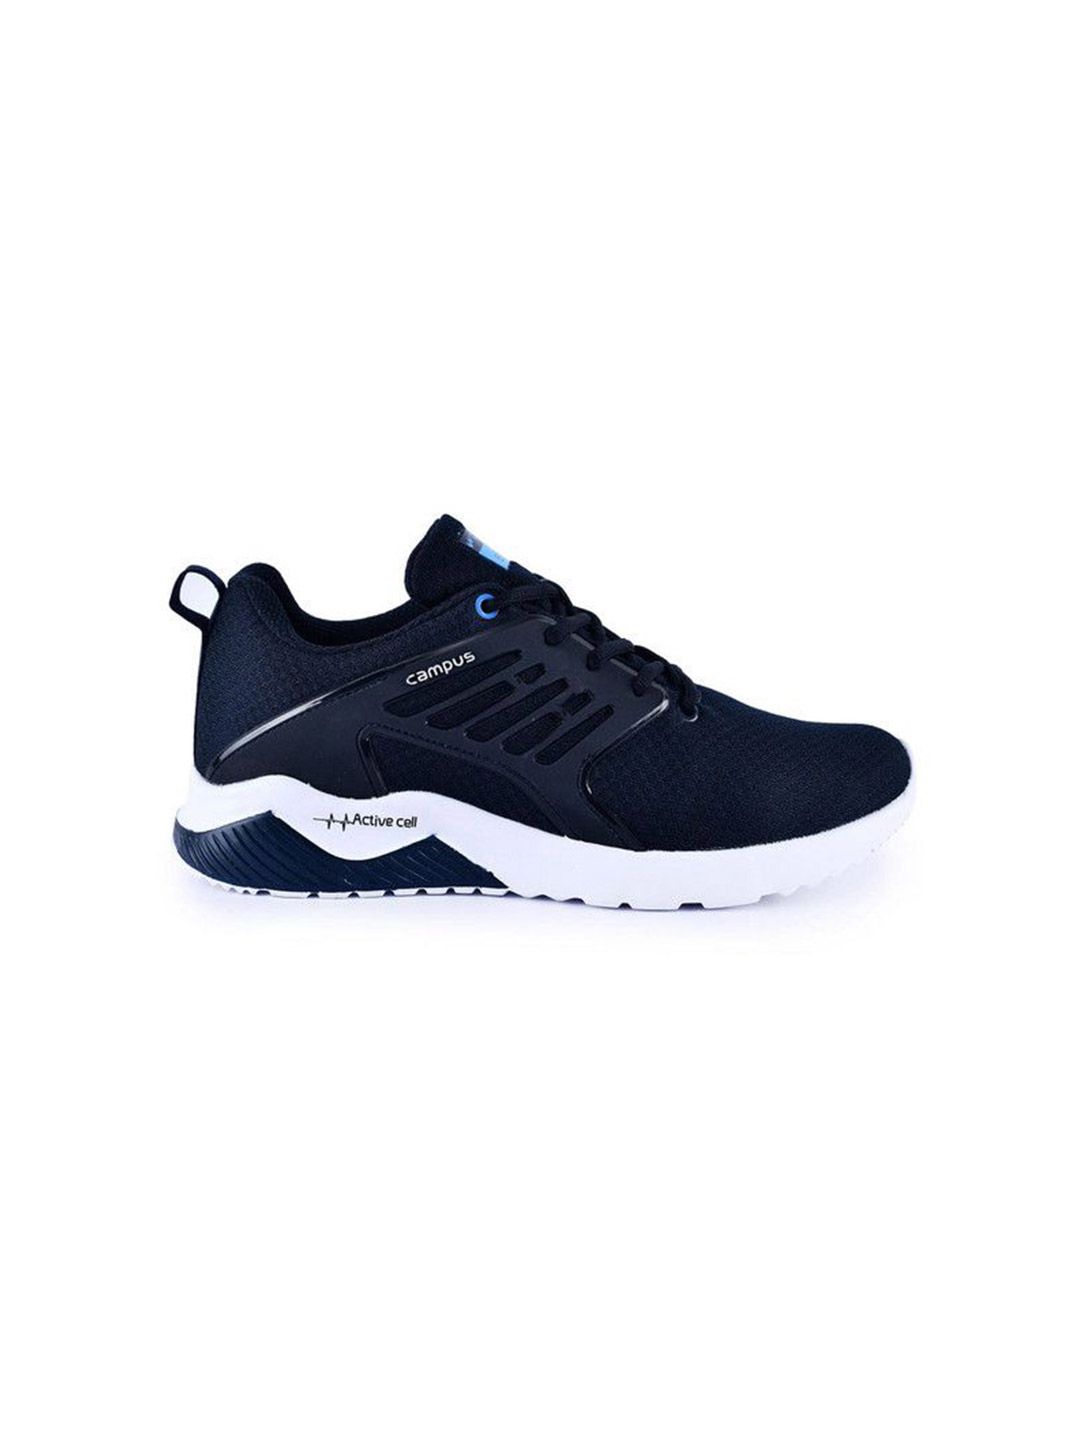 Buy Men Crysta Pro Blue Running Shoes From Fancode Shop.